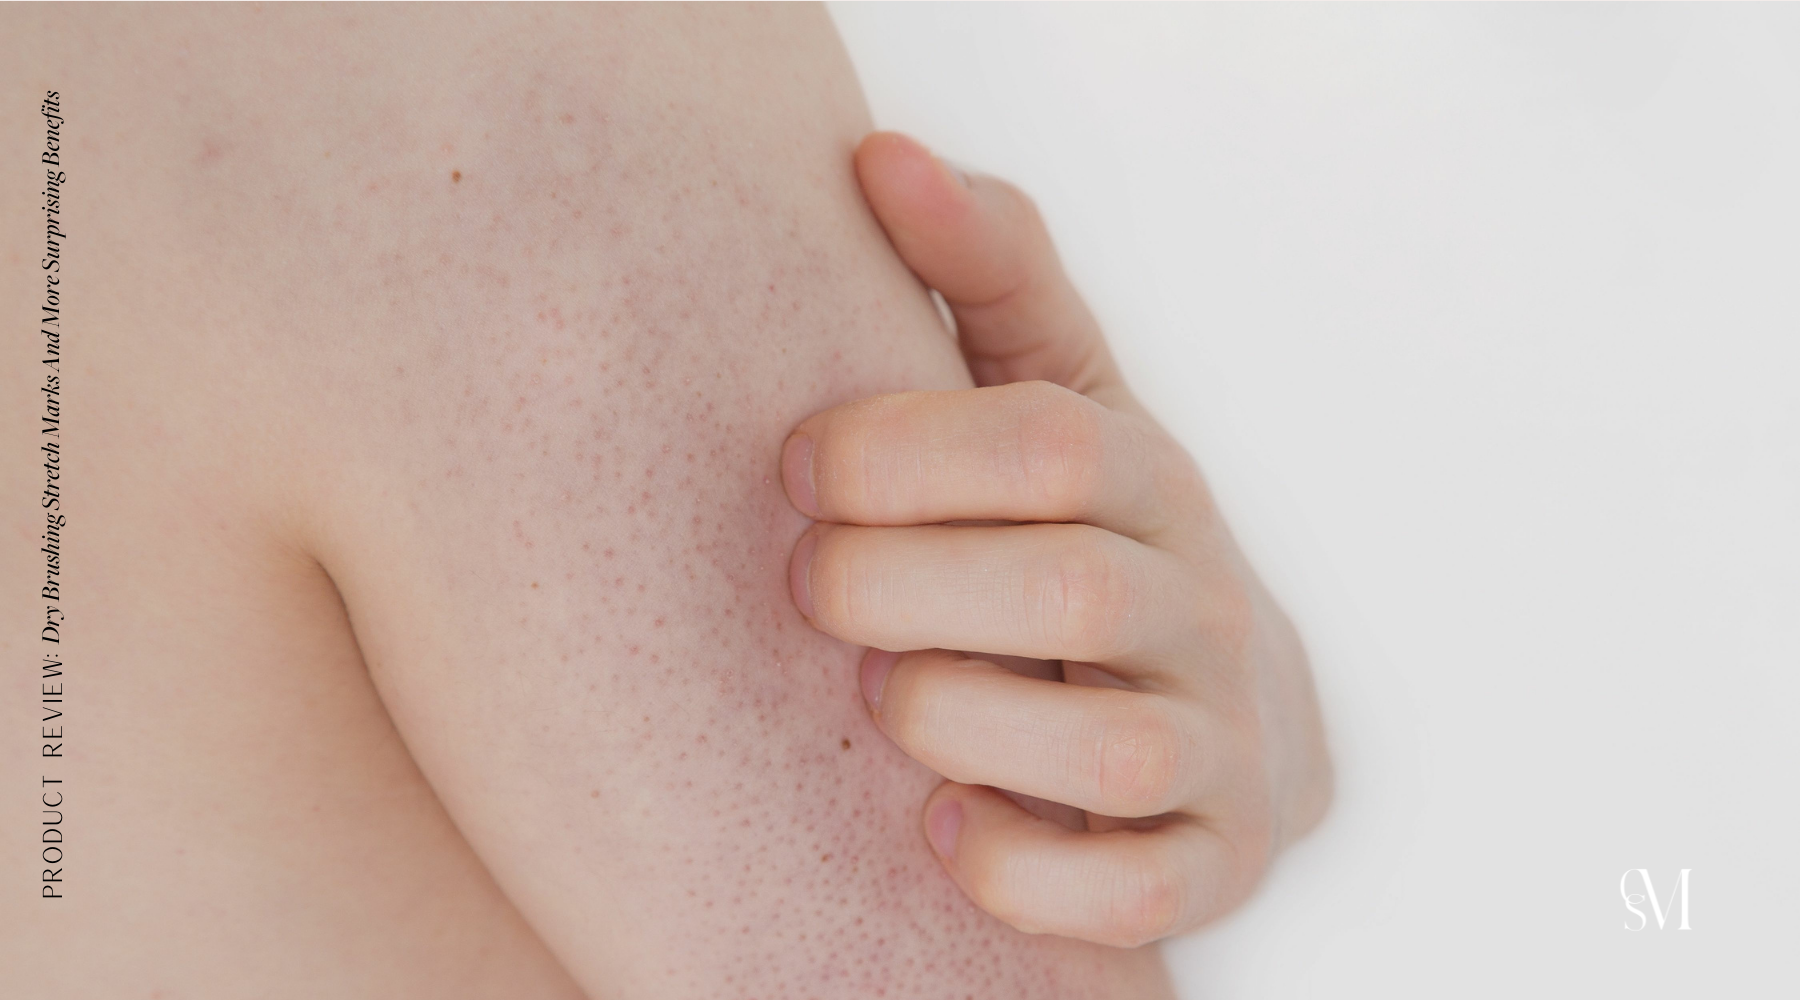 Keratosis Pilaris or commonly called Chicken Skin is a protein build-up called Keratin in the pores.